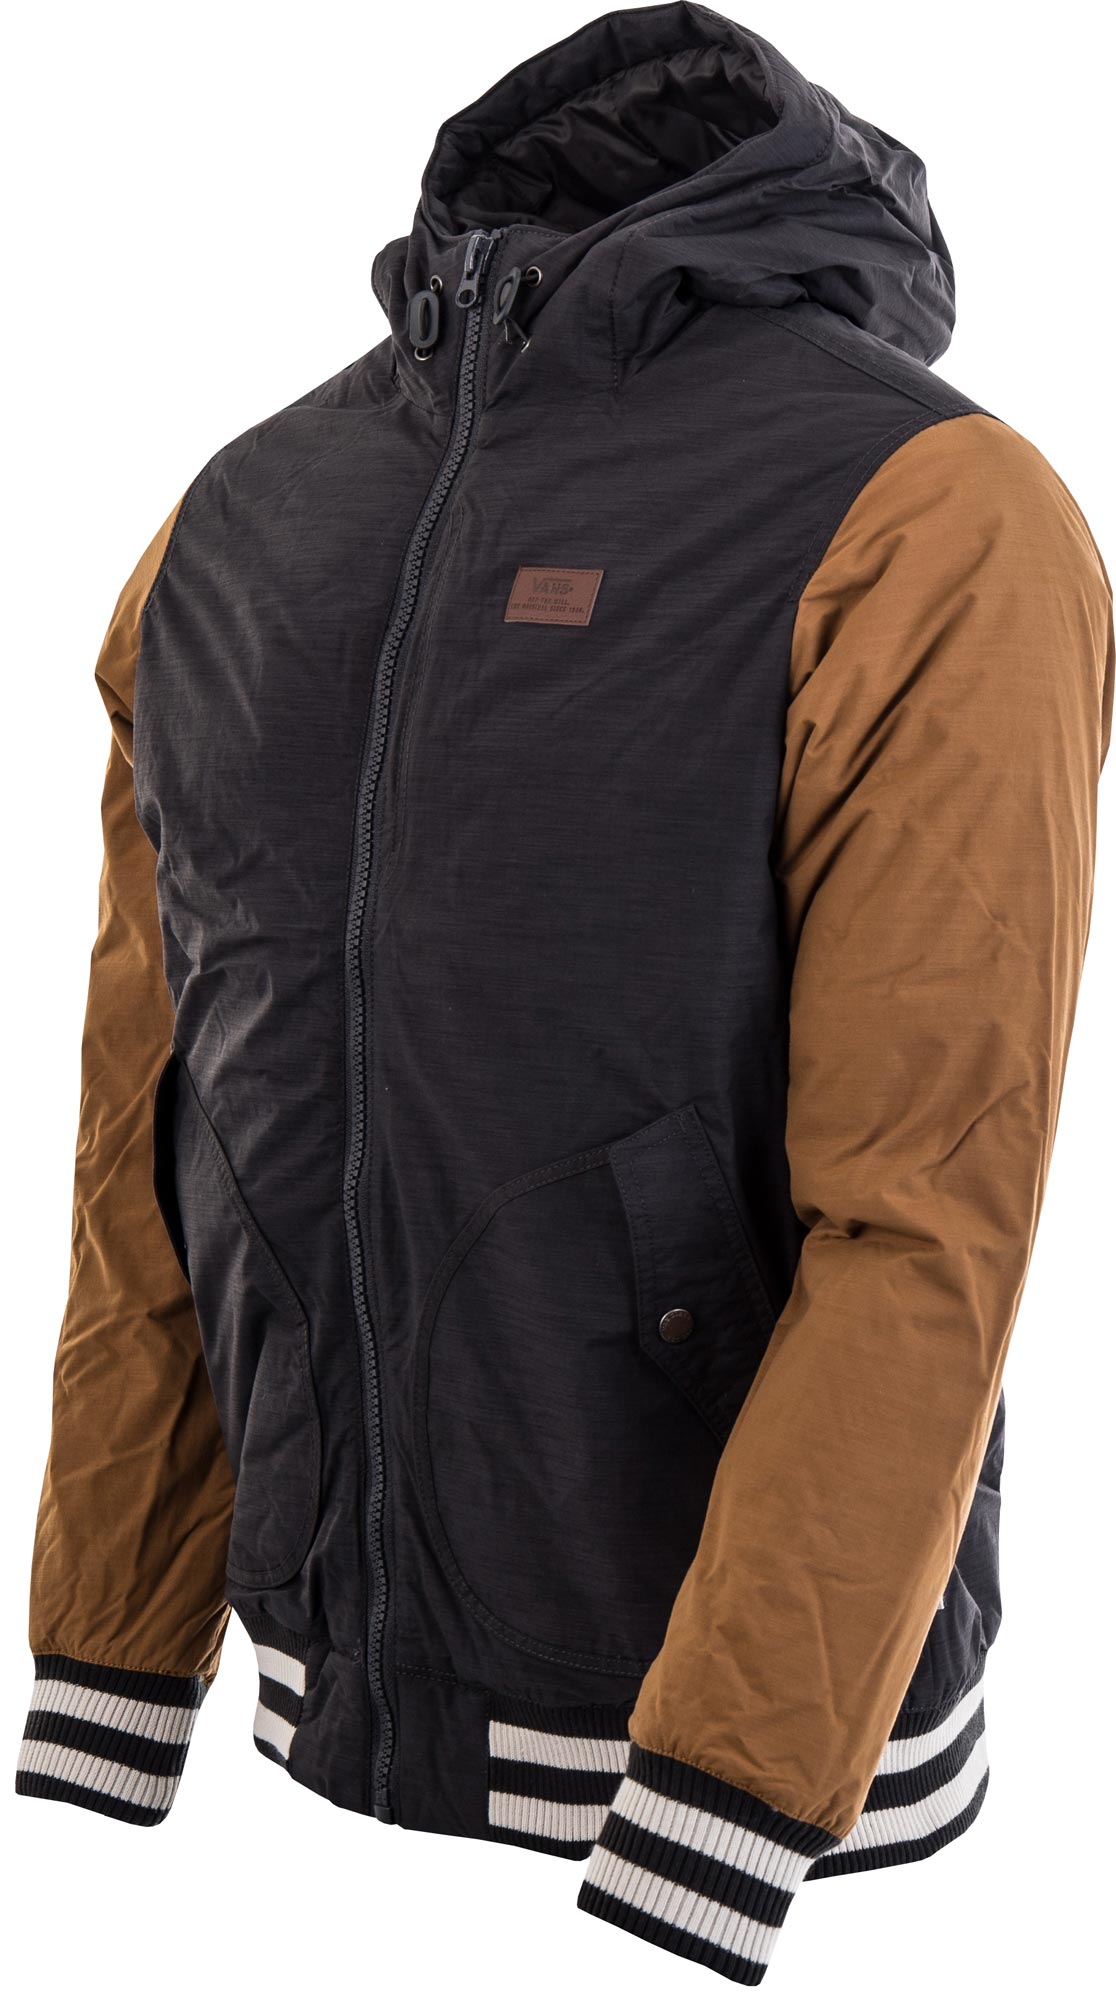 RUTHERFORD - Men's Winter Jacket